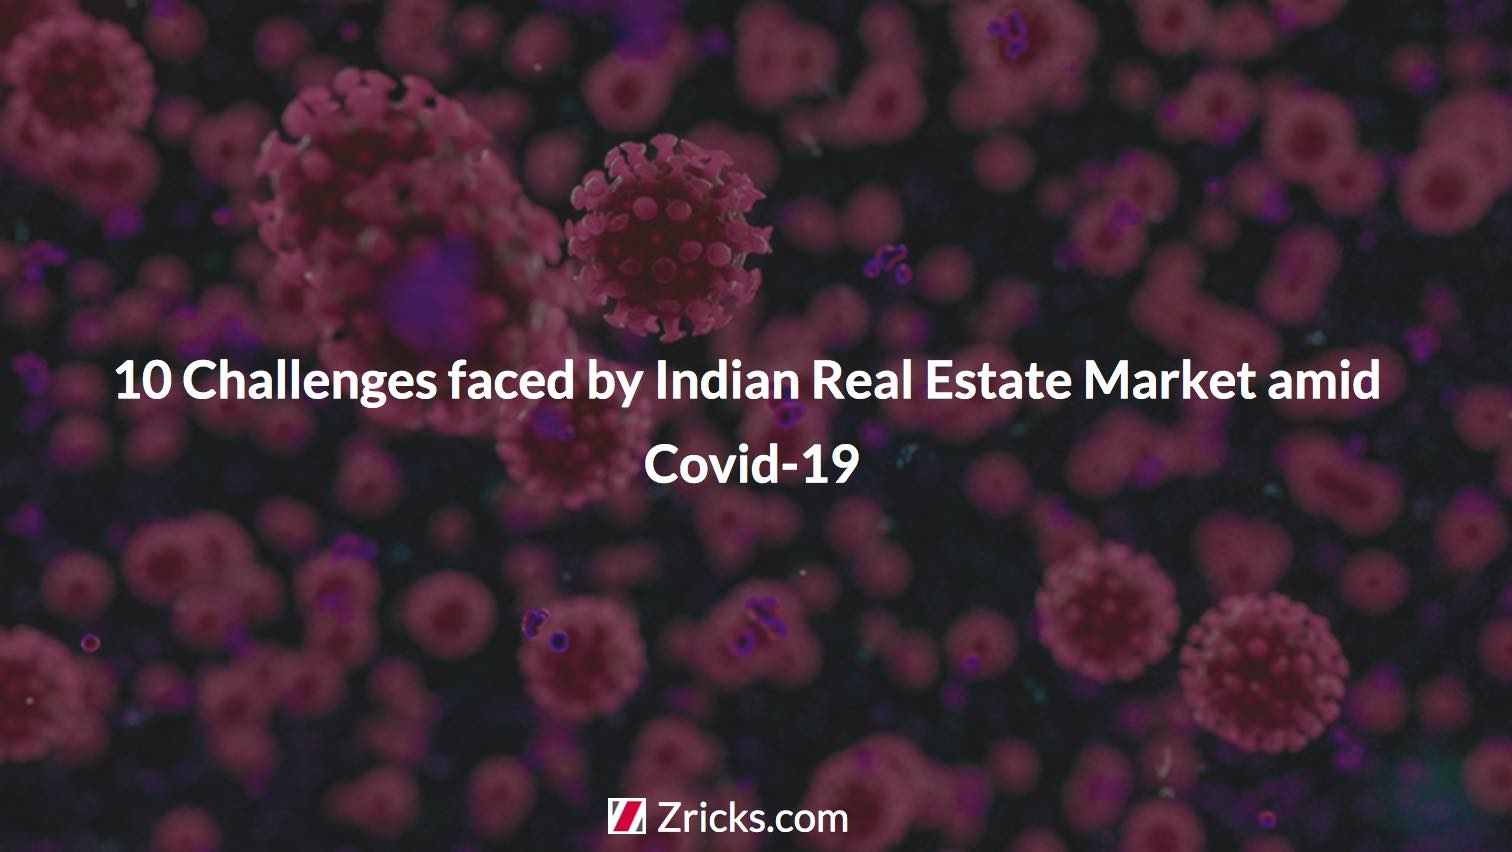 10 Challenges faced by Indian Real Estate Market amid Covid-19 Update